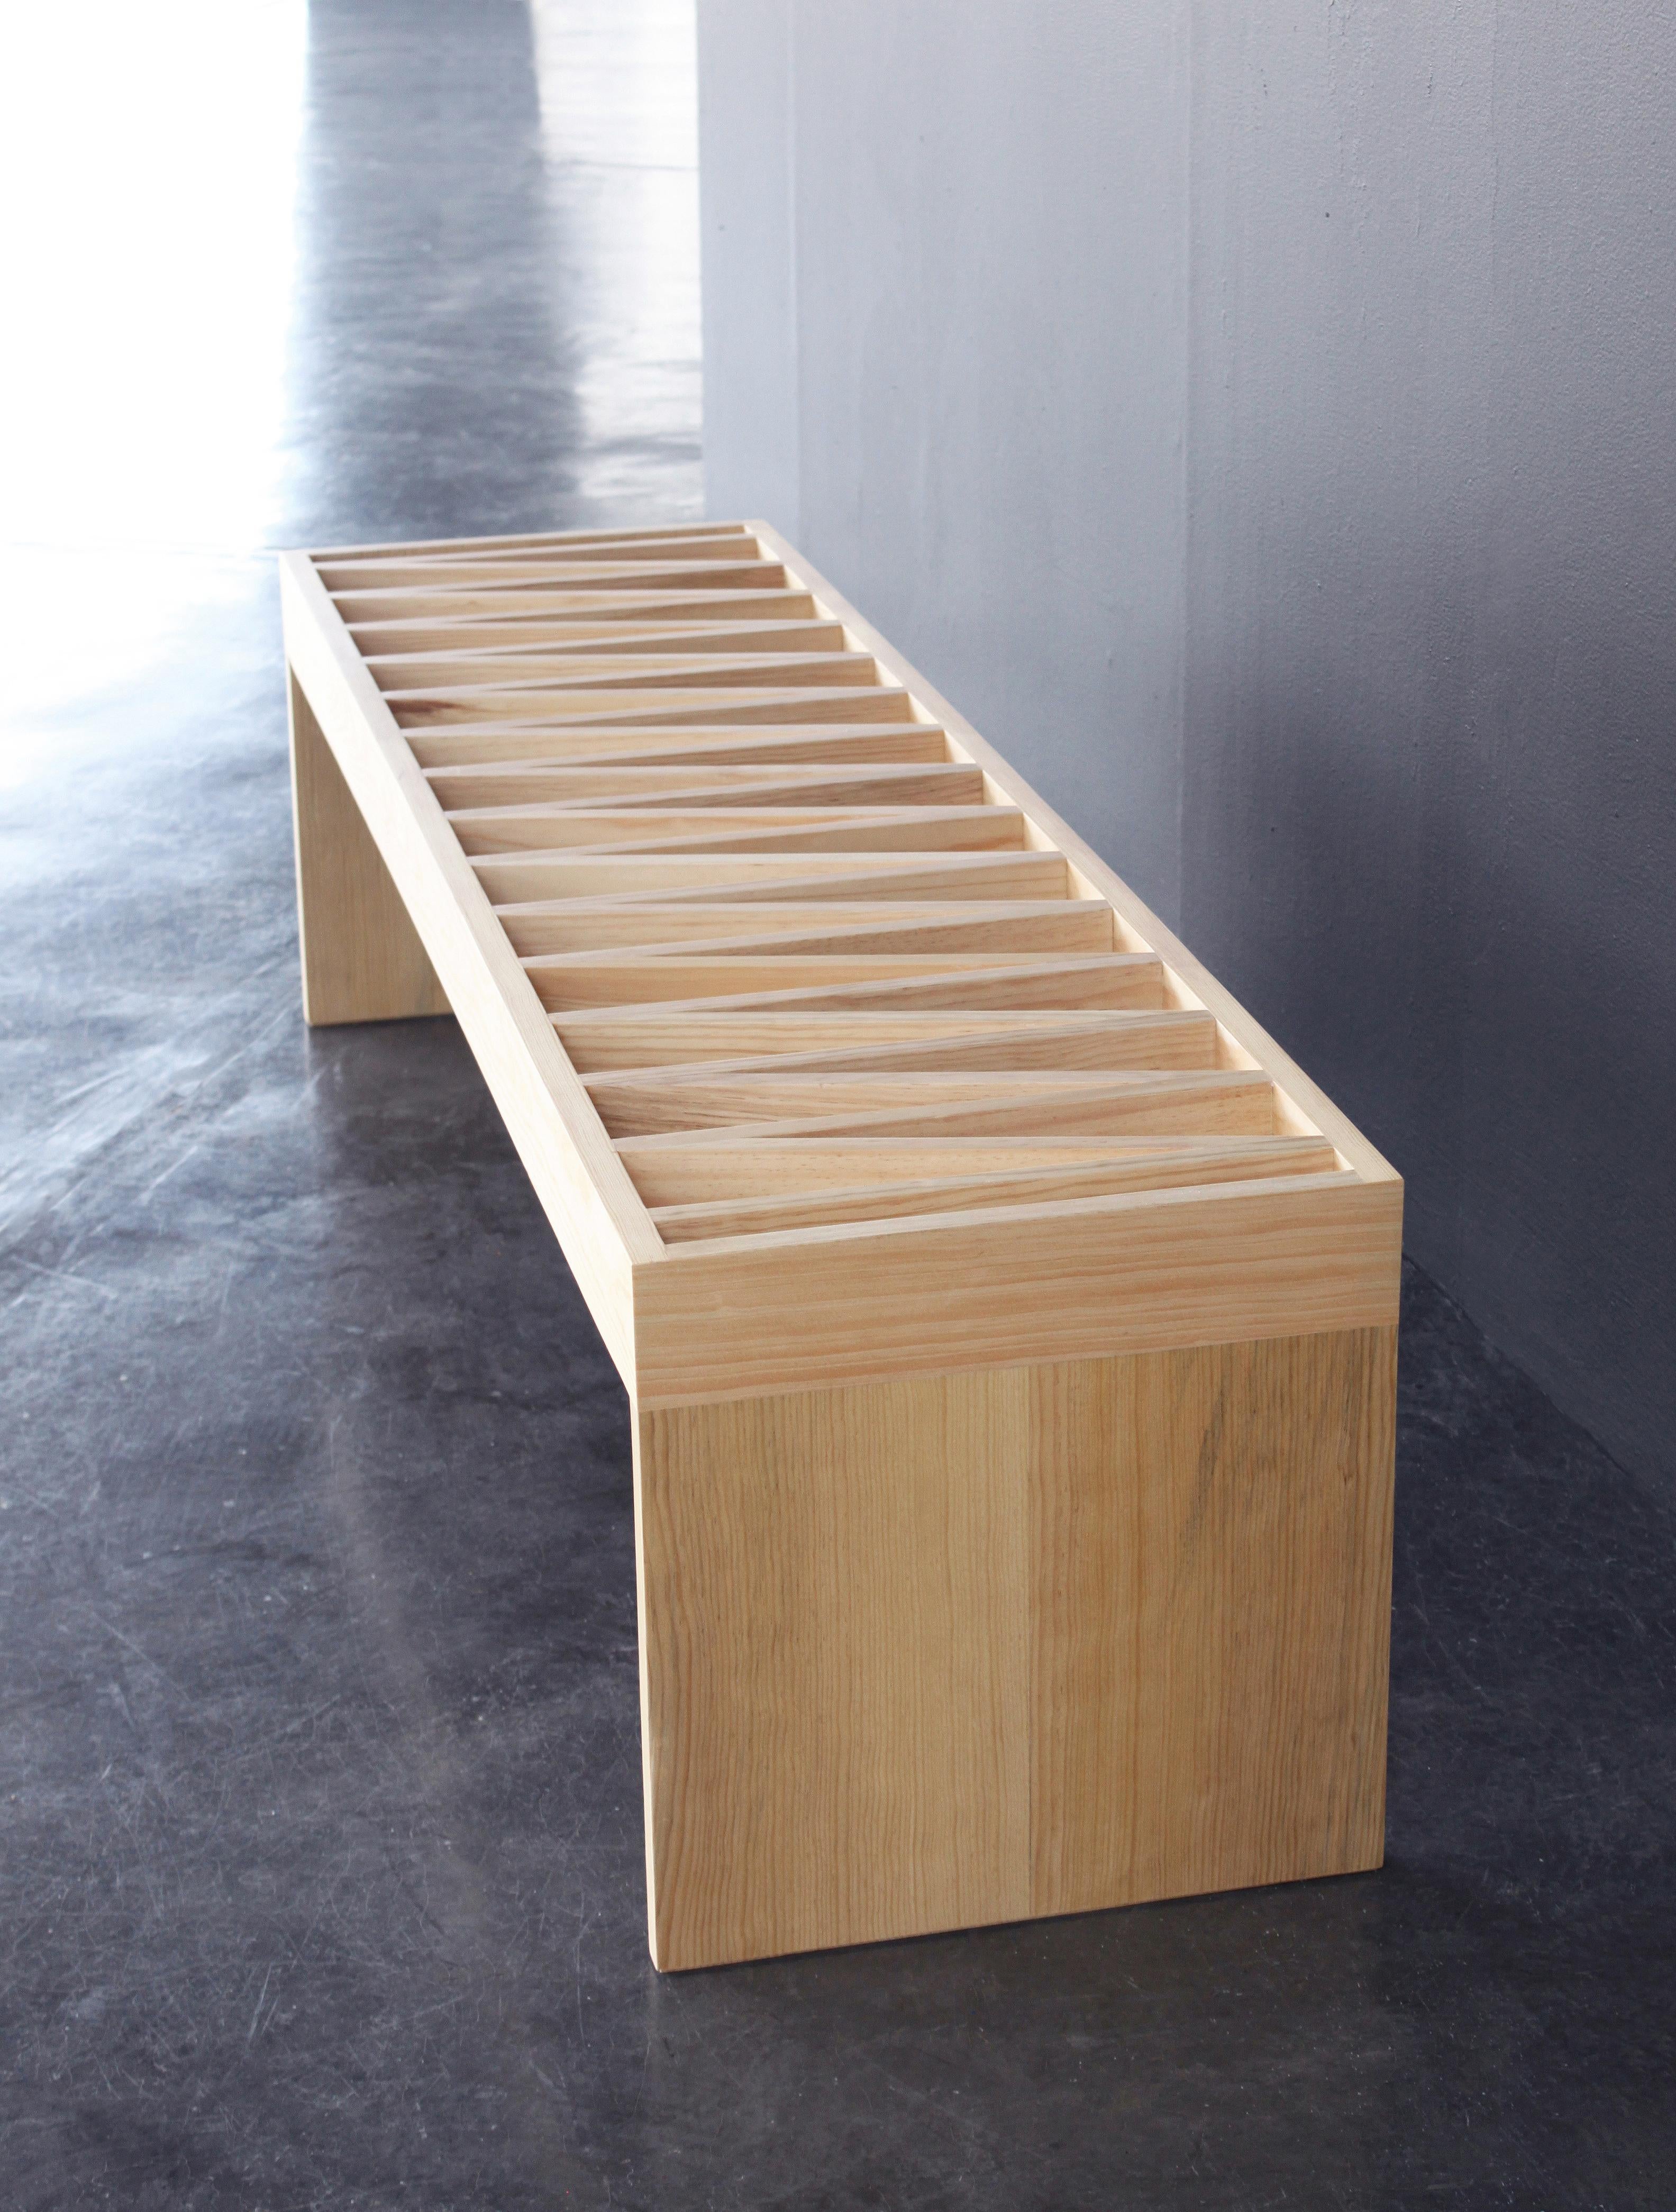 Mexican Banca Mia Bench by Maria Beckmann, Represented by Tuleste Factory